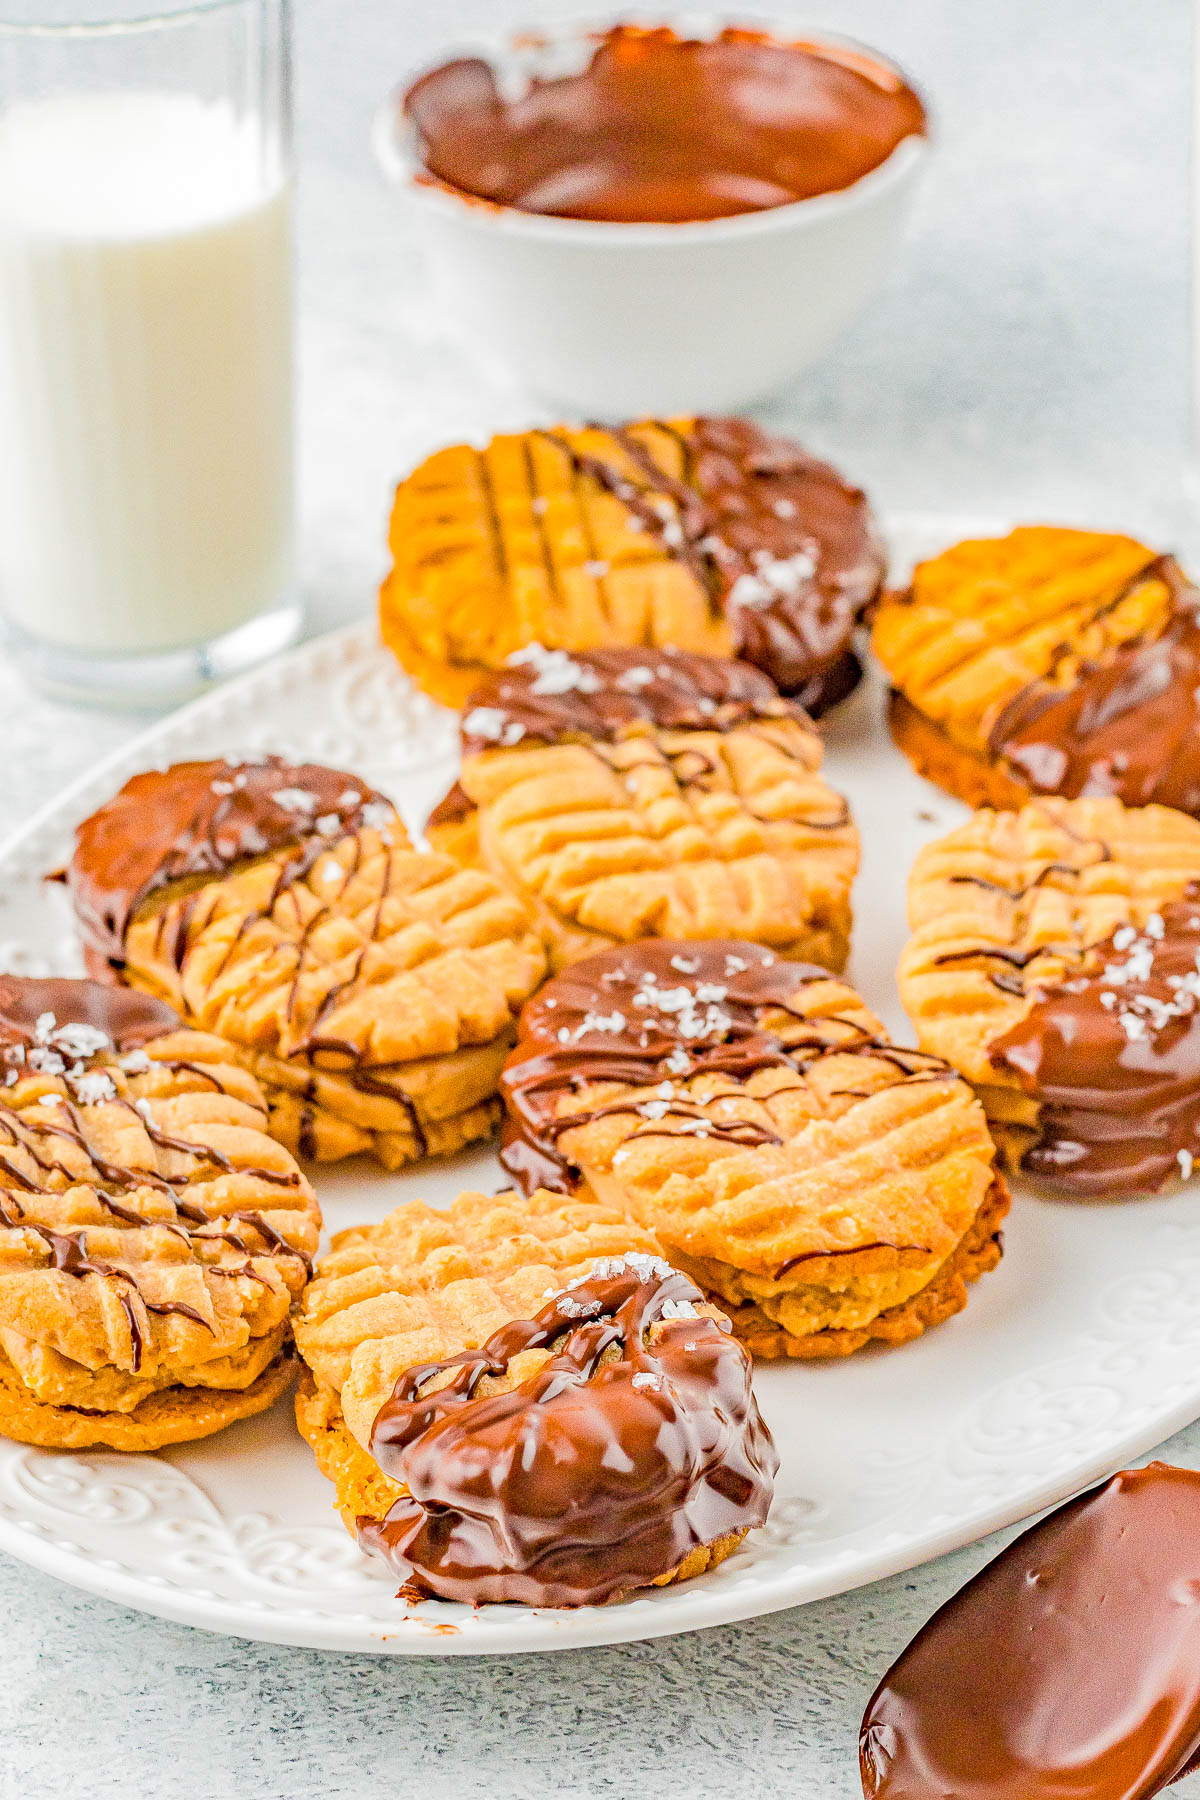 Homemade Nutter Butter Cookies - Homemade copycat Nutter Butters are so much better than the store bought originals! Creamy peanut butter filling is sandwiched between lightly crunchy peanut butter cookies. Pinches of optional sea salt and melted chocolate drizzled over the tops make these cookies simply THE BEST! 